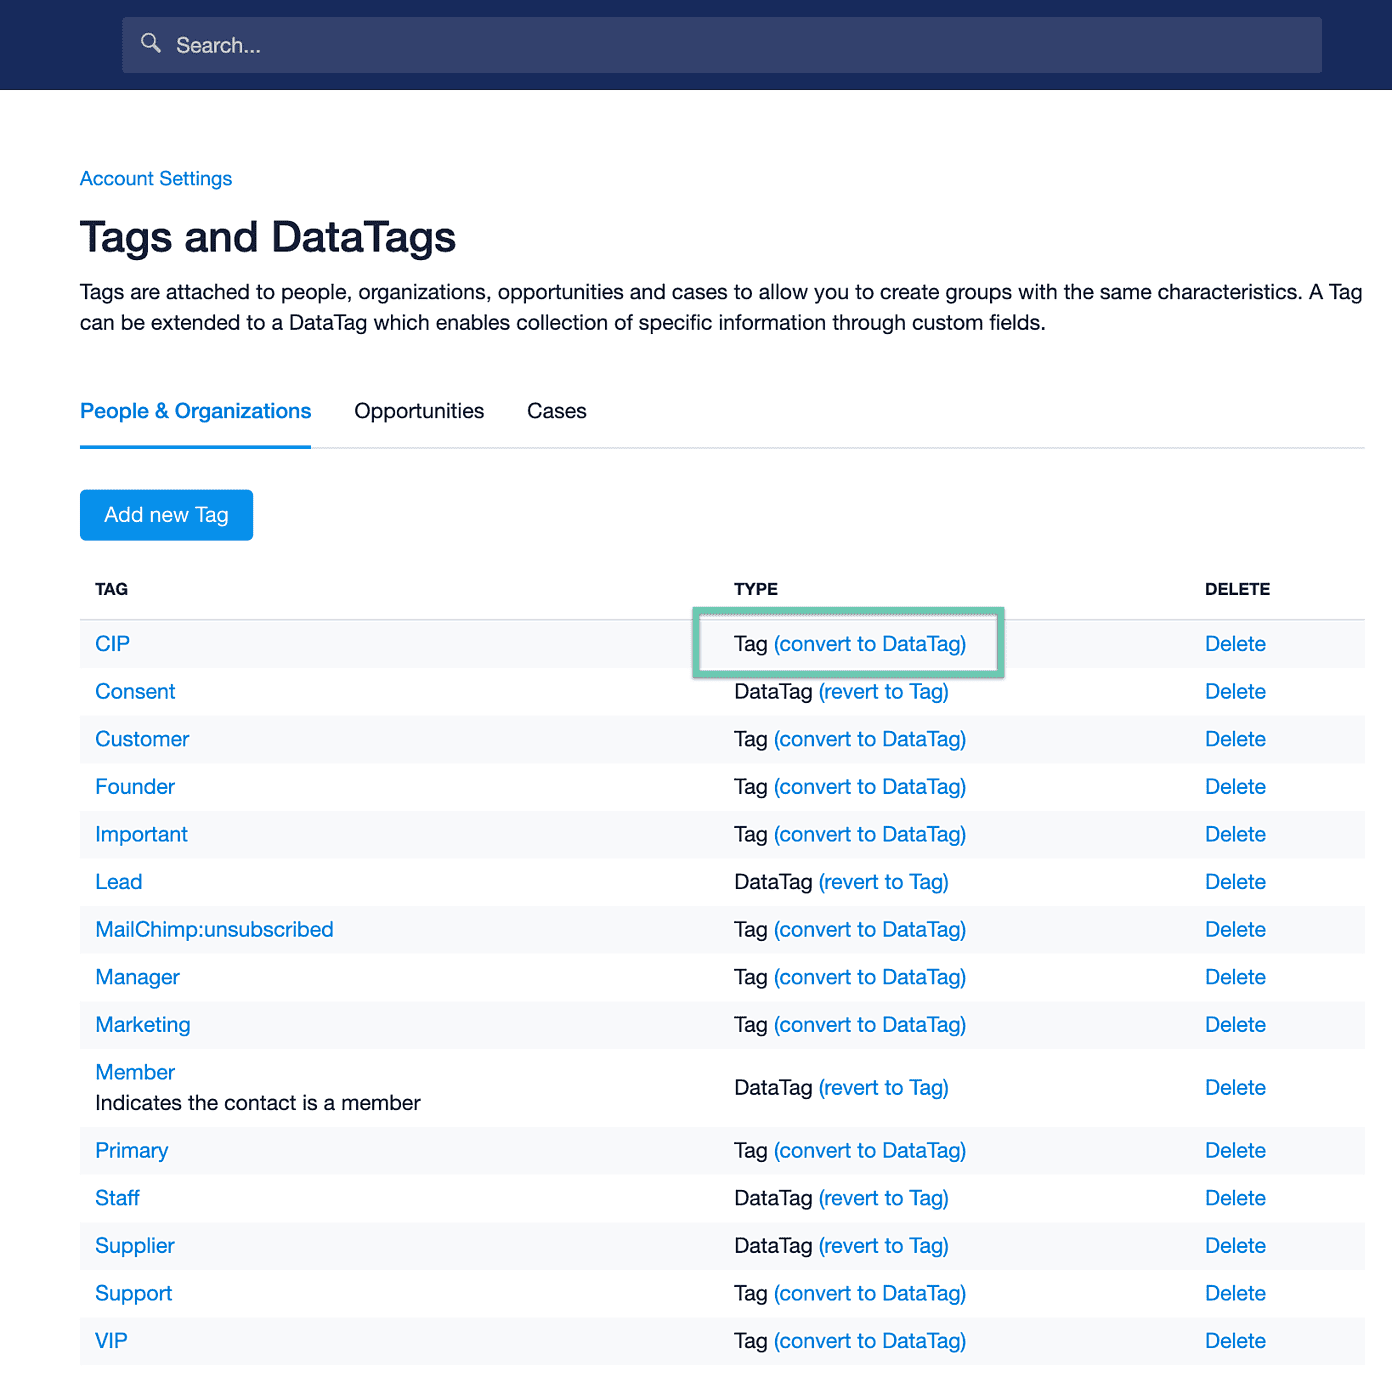 A list of tags with option to convert to DataTag